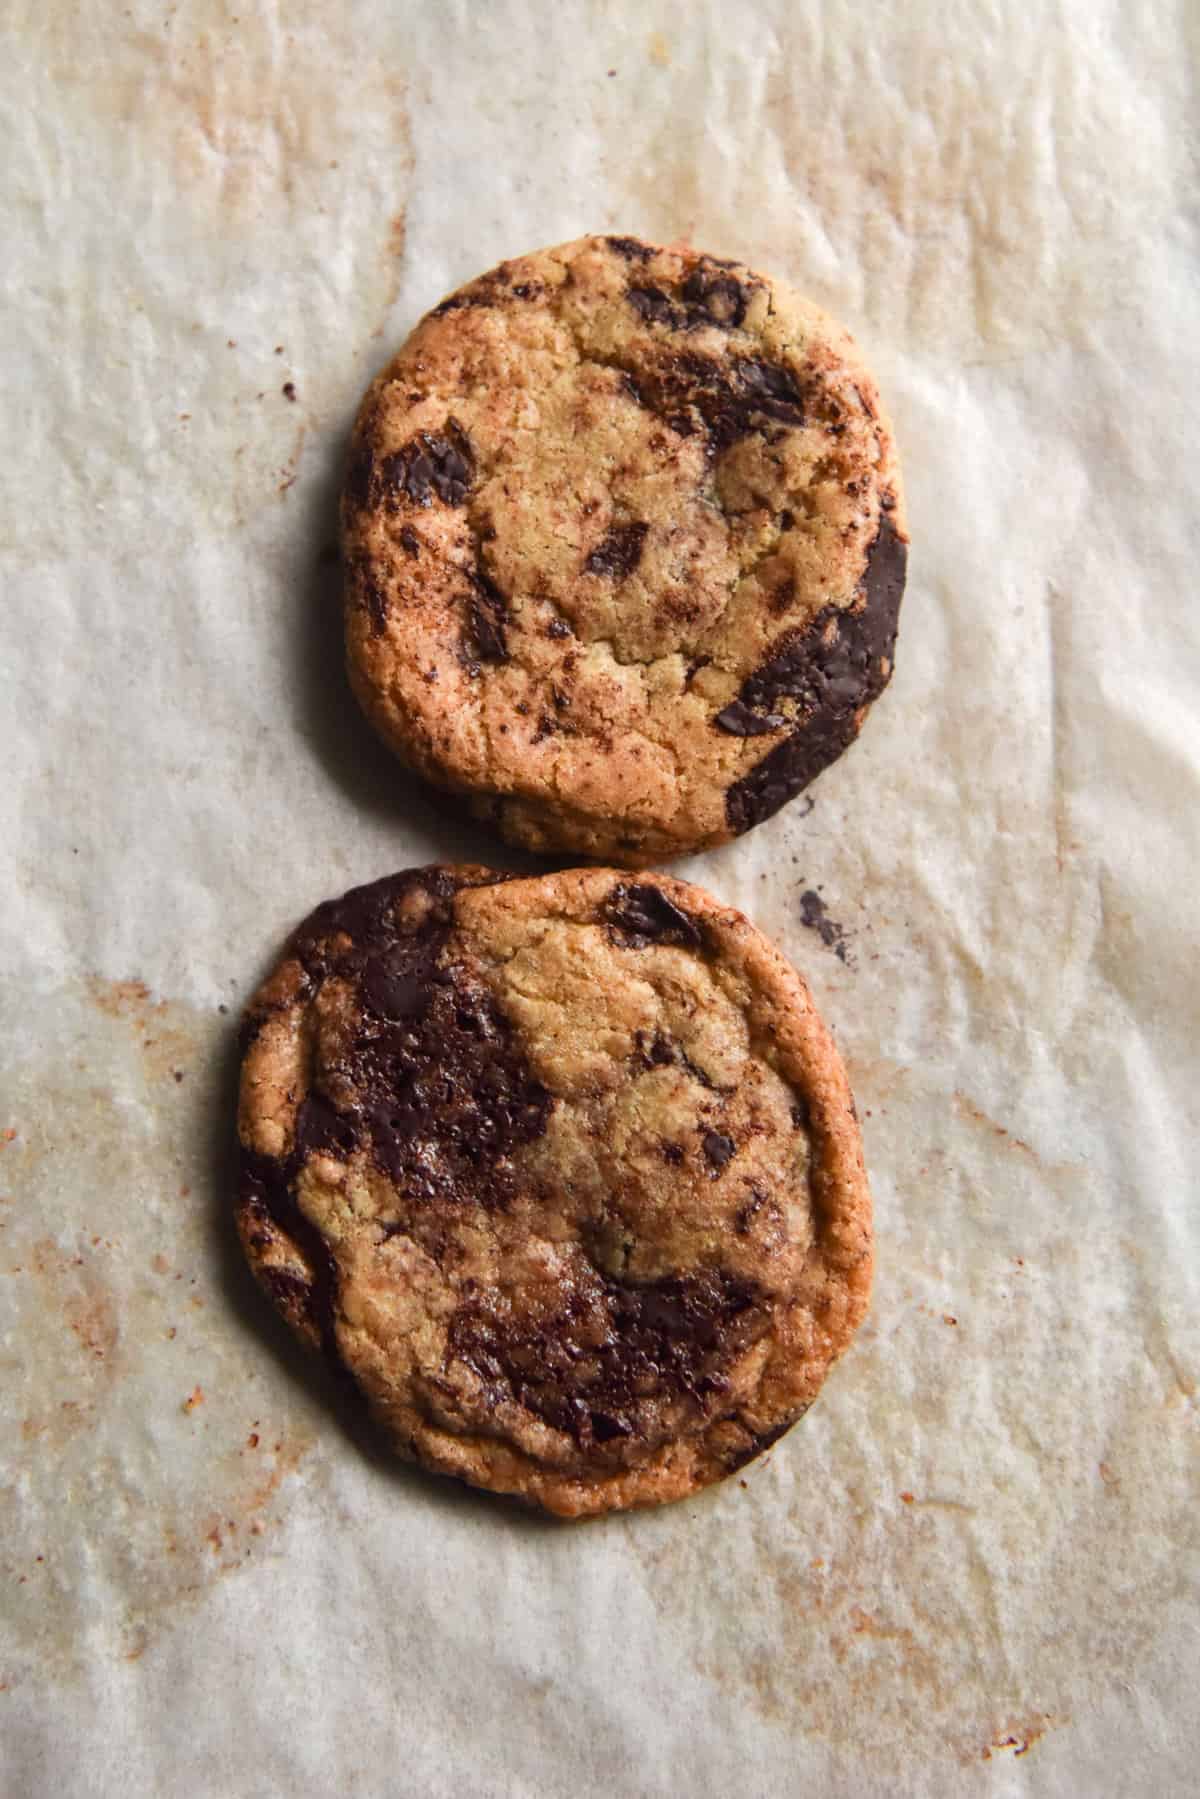 Brown butter and sea salt gluten free choc chip cookies from www.georgeats.com | @georgeats